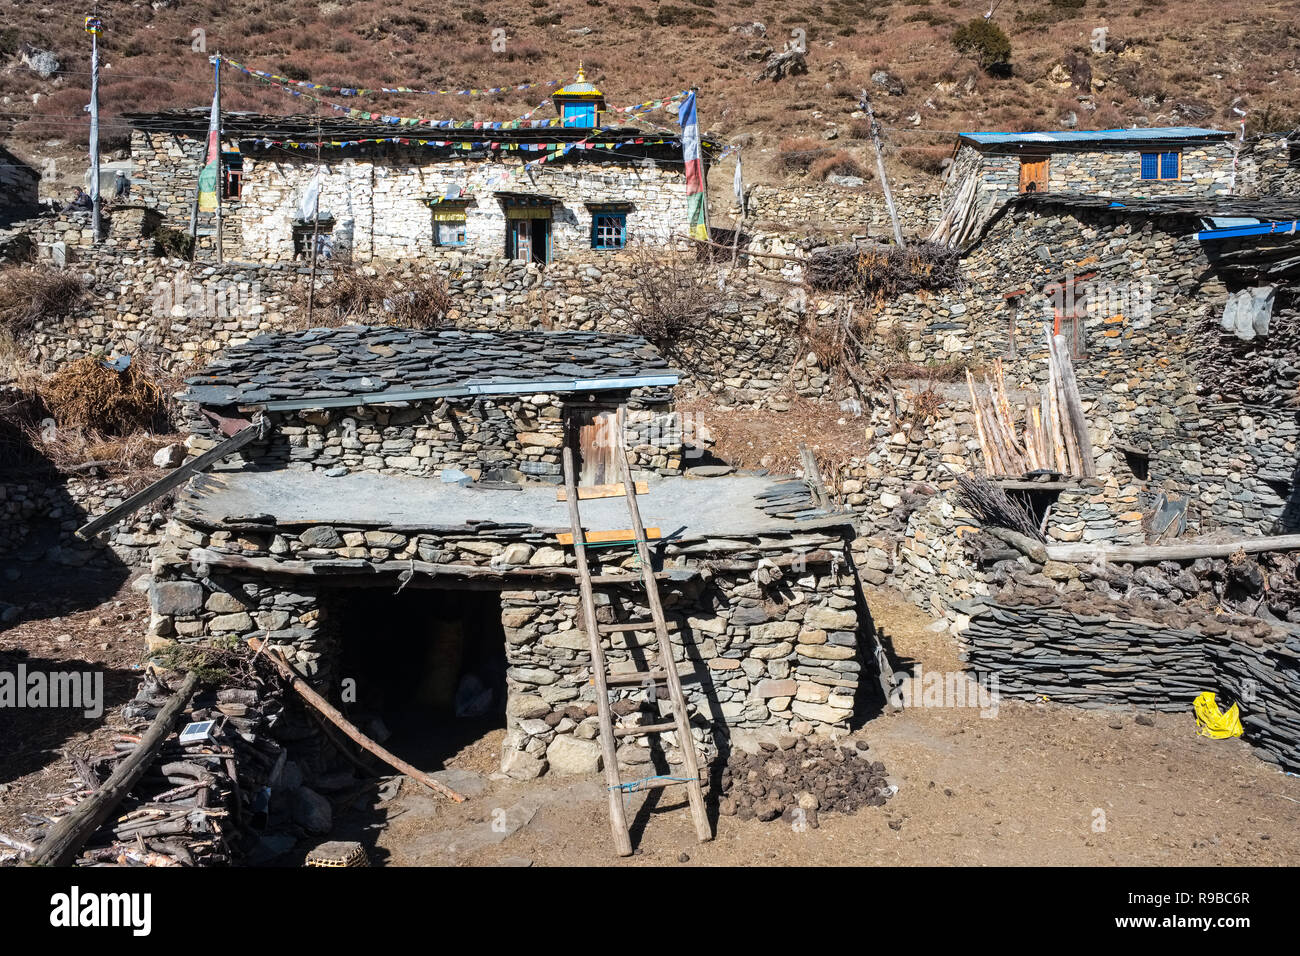 The Tibetan village of Samdo on the Manaslu Circuit trek is made up of traditional 2 storey houses with livestock below living quarters Stock Photo